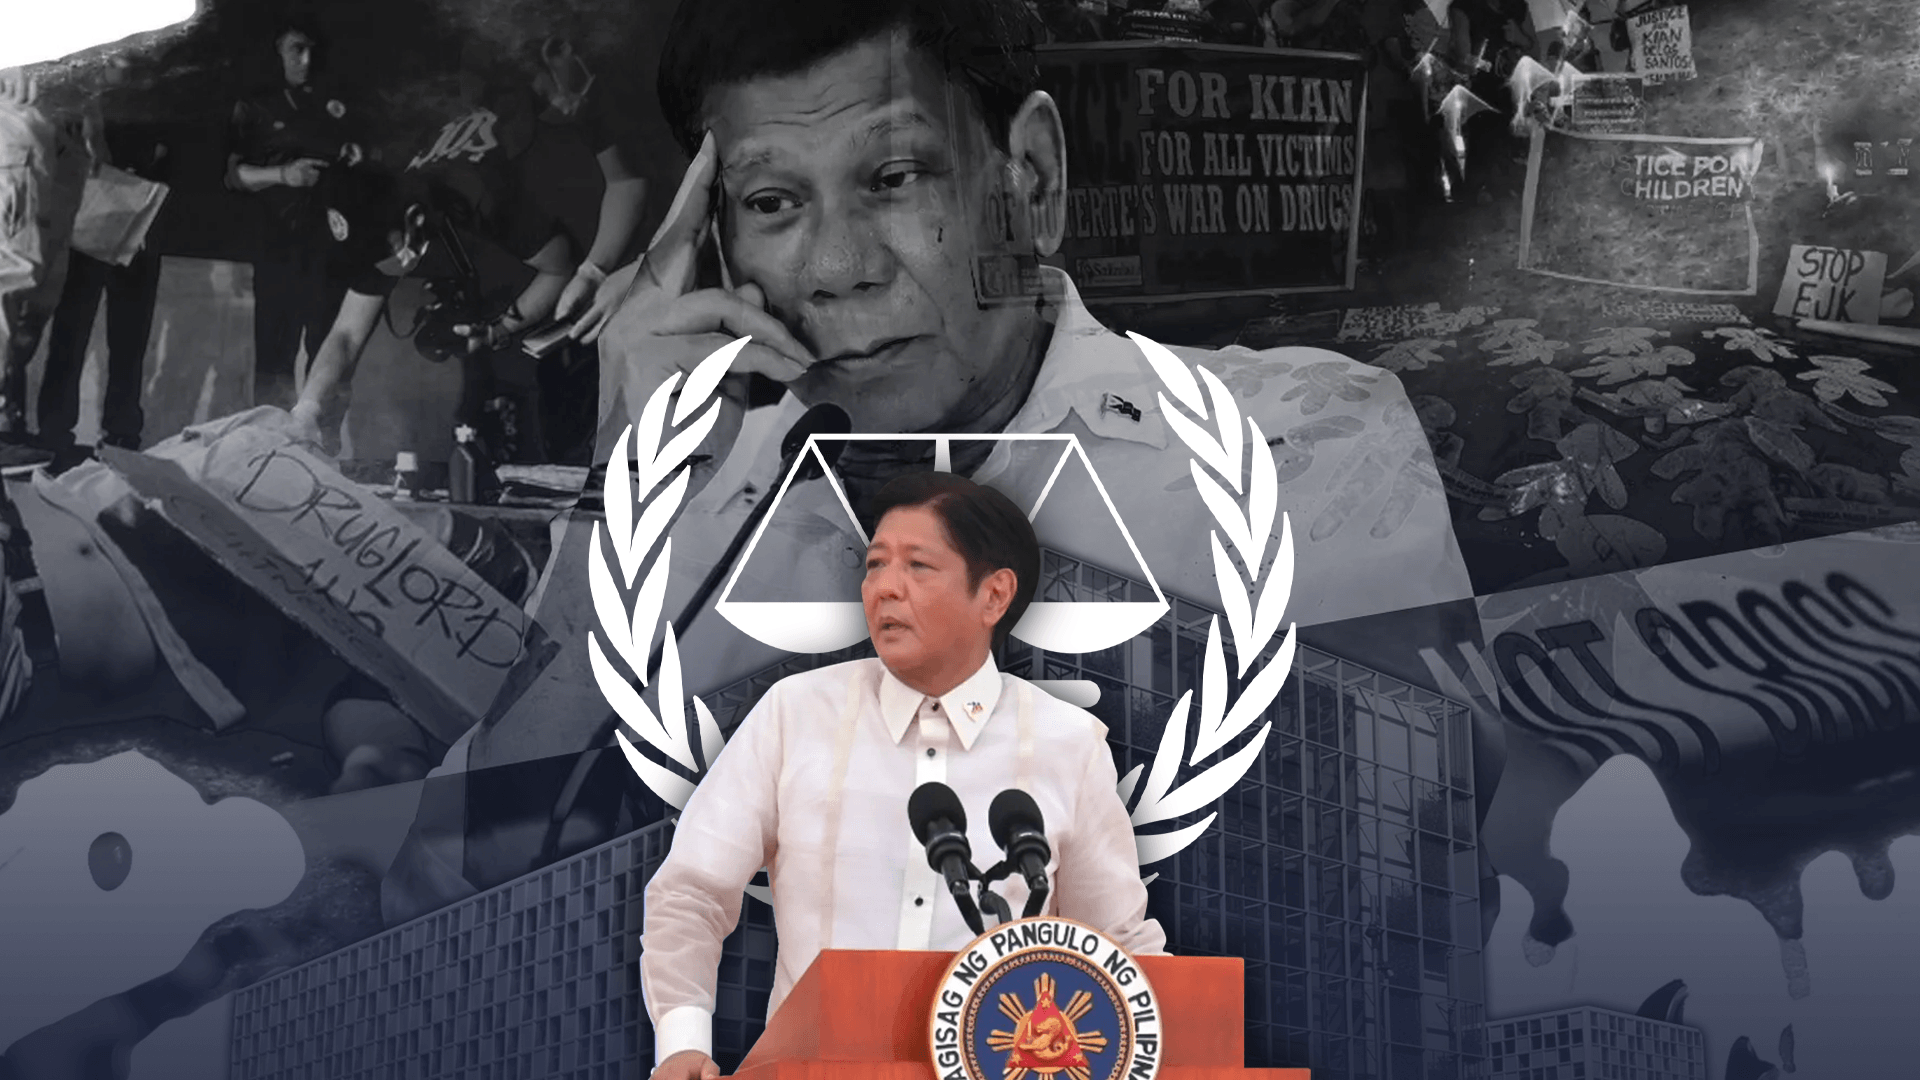 Marcos has no plans of rejoining ICC. What now?